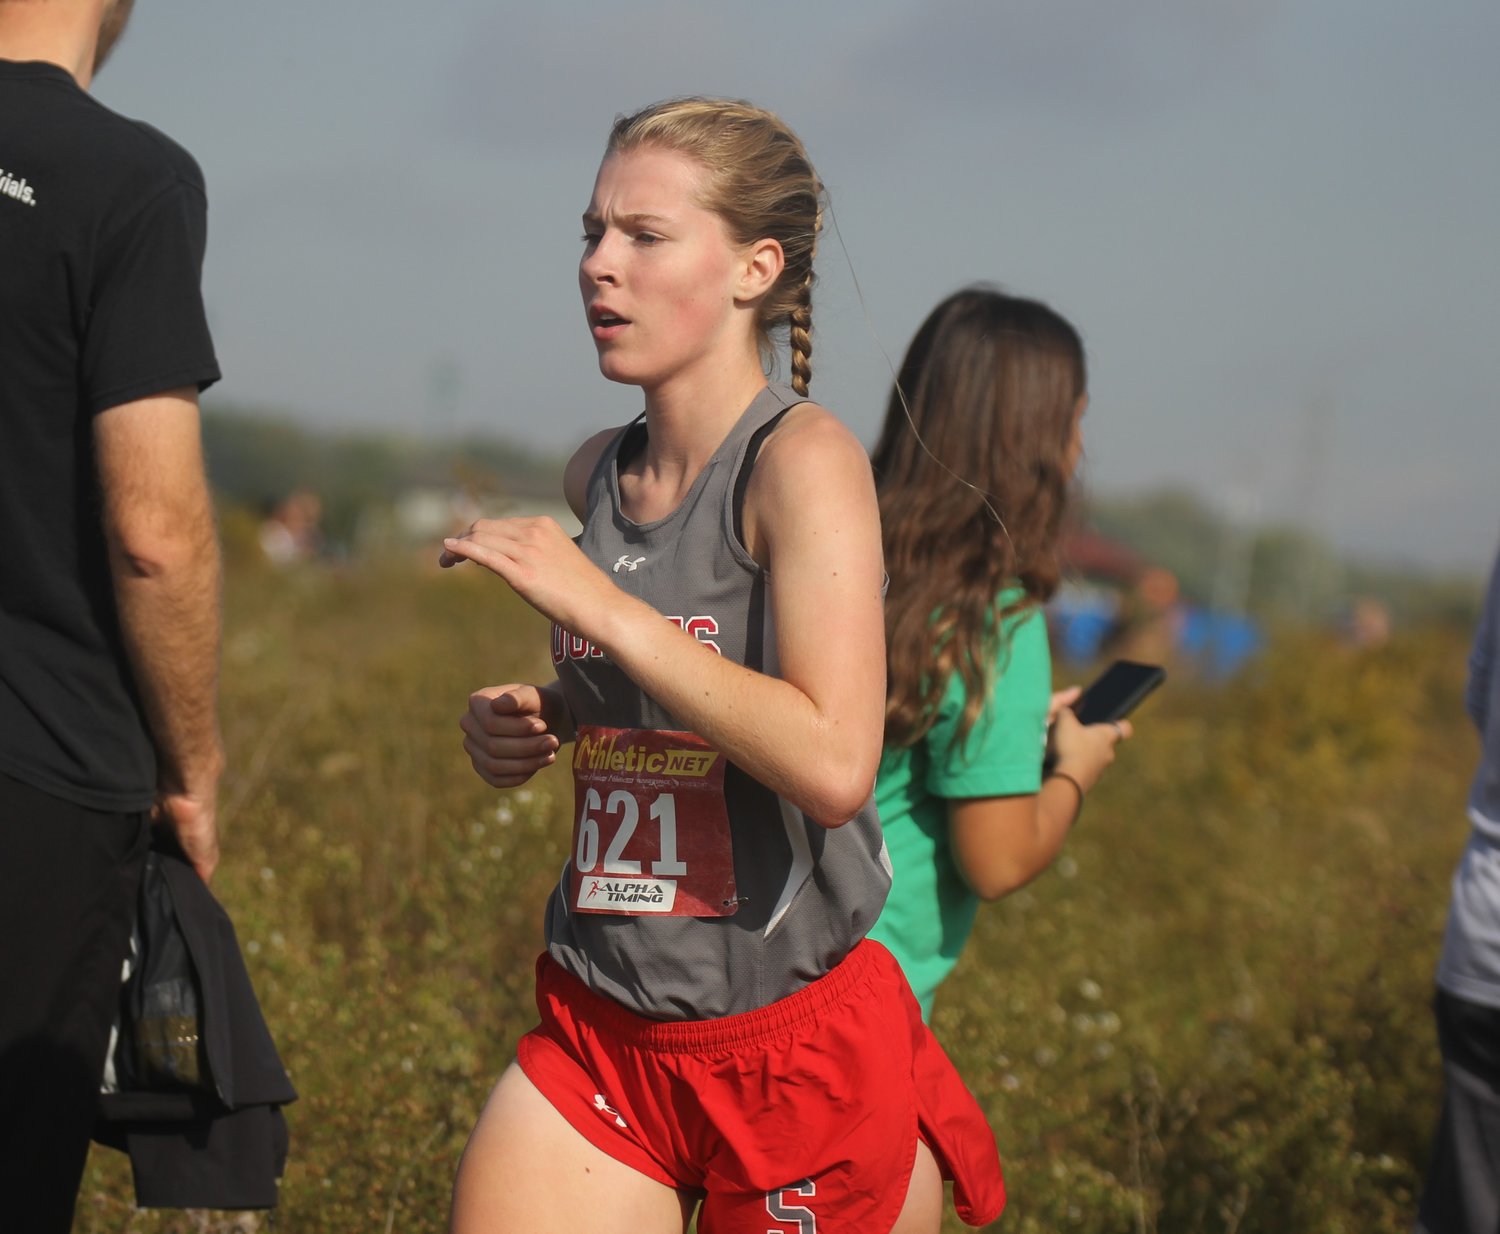 Southmont's Faith Allen has advanced to the semi-state in each of her first three seasons. She will look to break through to the State Finals next year in her senior season.